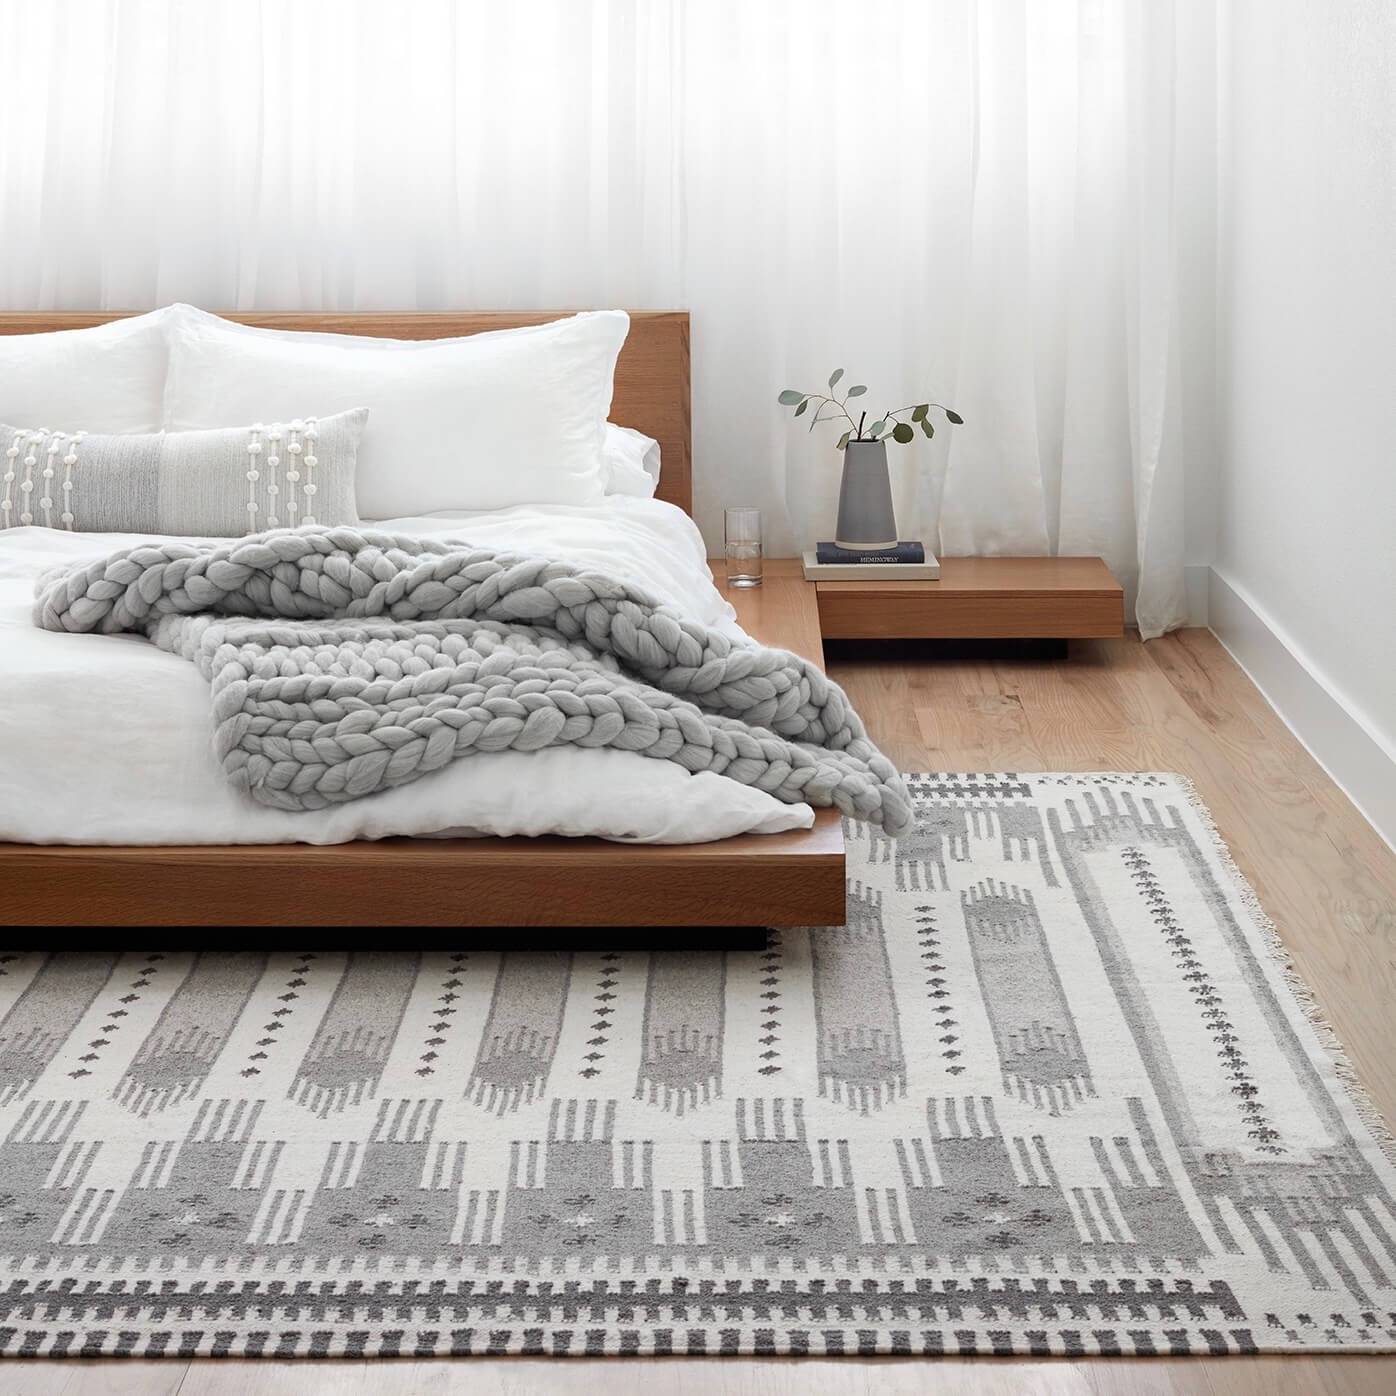 The Citizenry Asha Handwoven Area Rug | 8' x 10' | Grey - Image 2